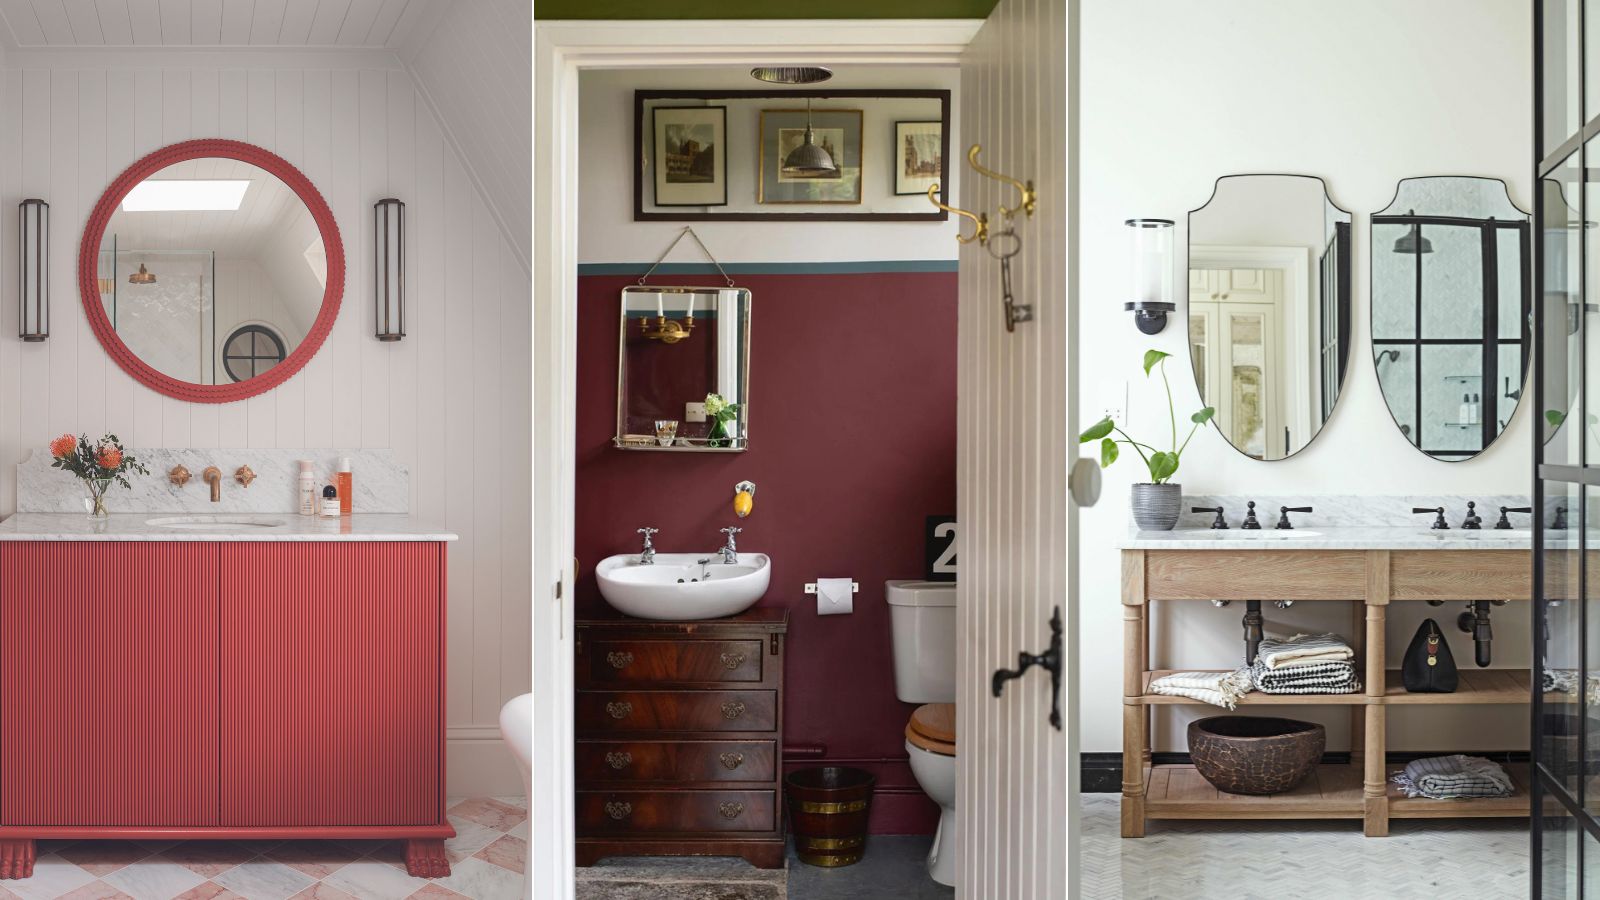 Avoid clutter with these pull-out bathroom storage ideas! - Your  Projects@OBN